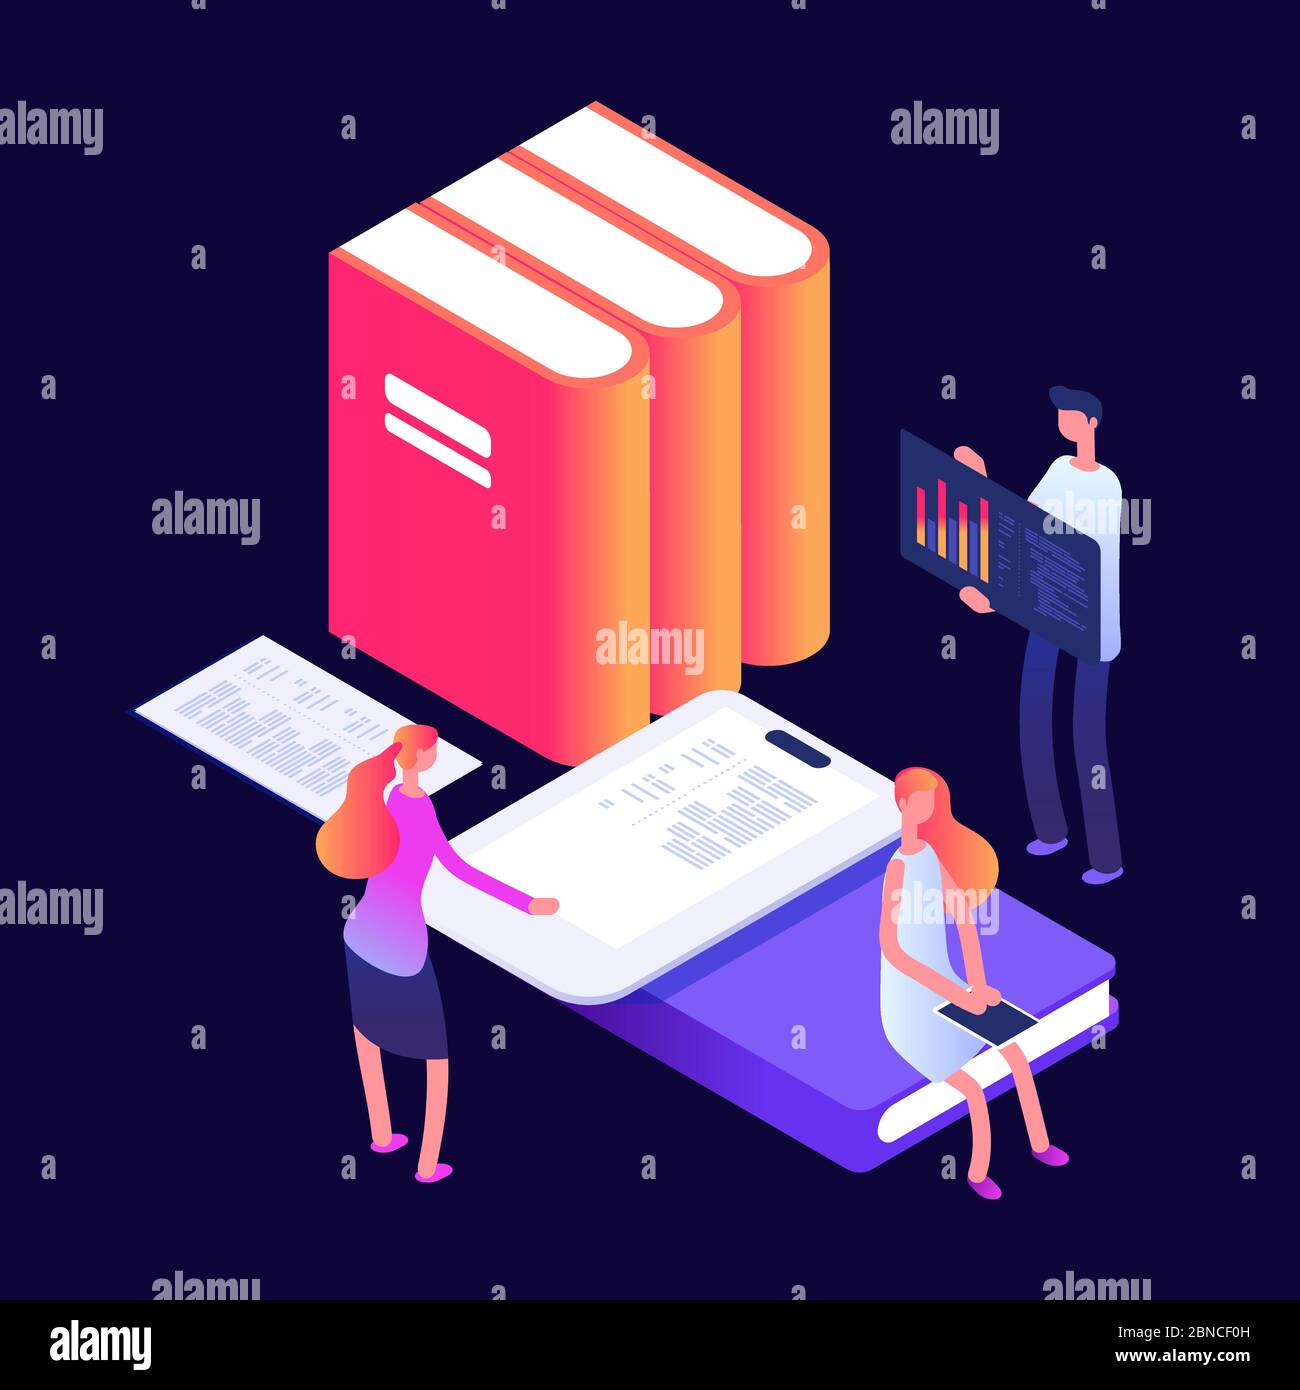 Online and self education vector concept with books and people. Education and study with e-book, online teaching illustration Stock Vector